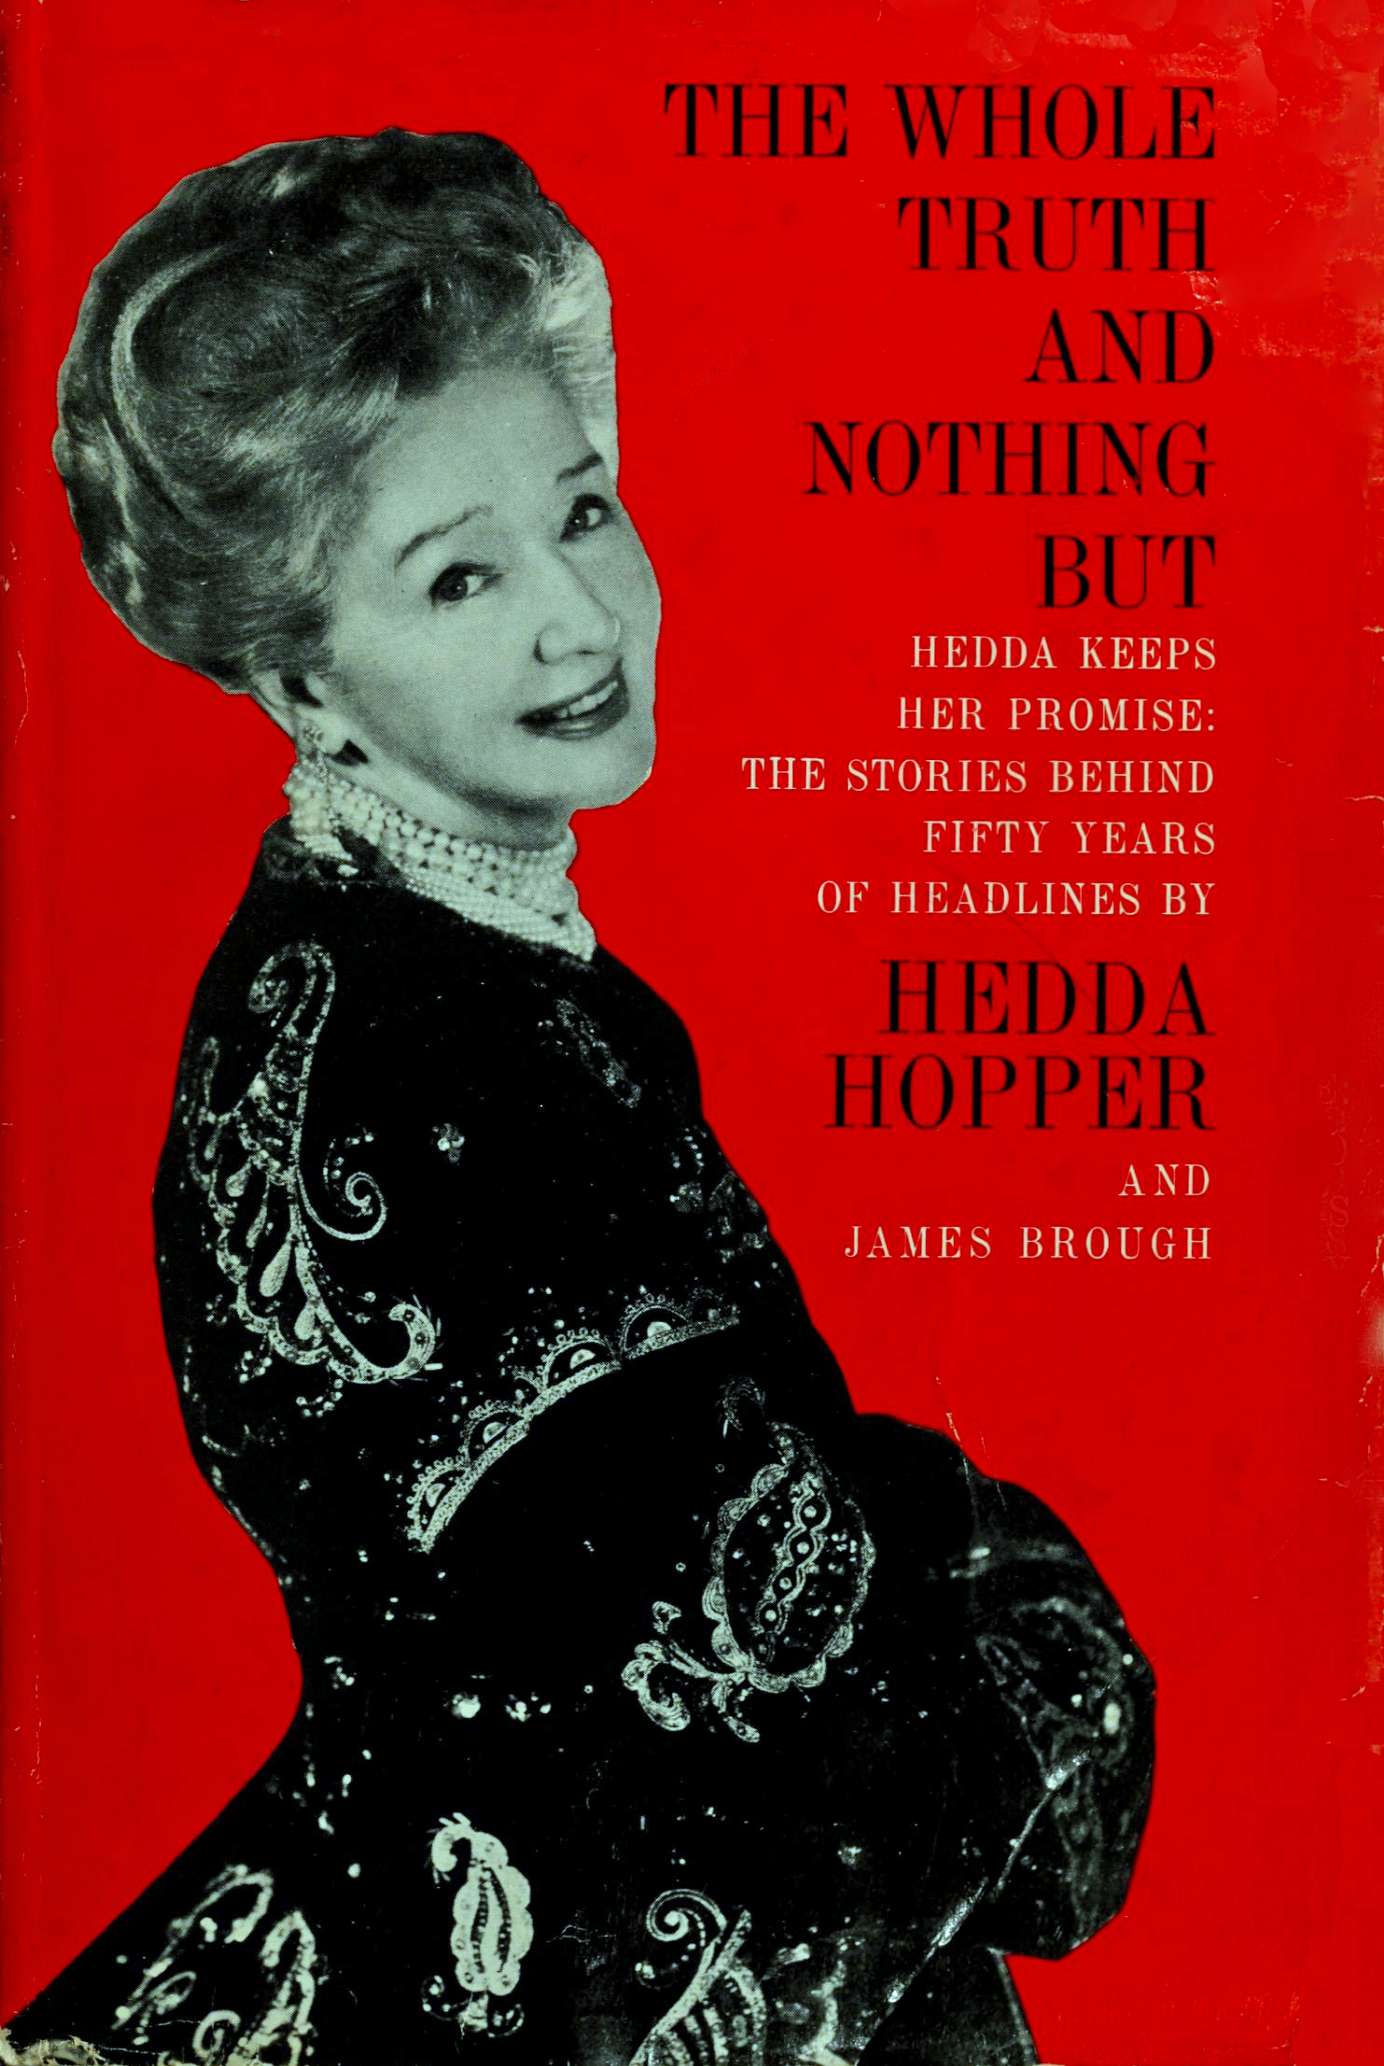 The Whole Truth And Nothing But, by Hedda Hopper and James Brough—A Project  Gutenberg eBook